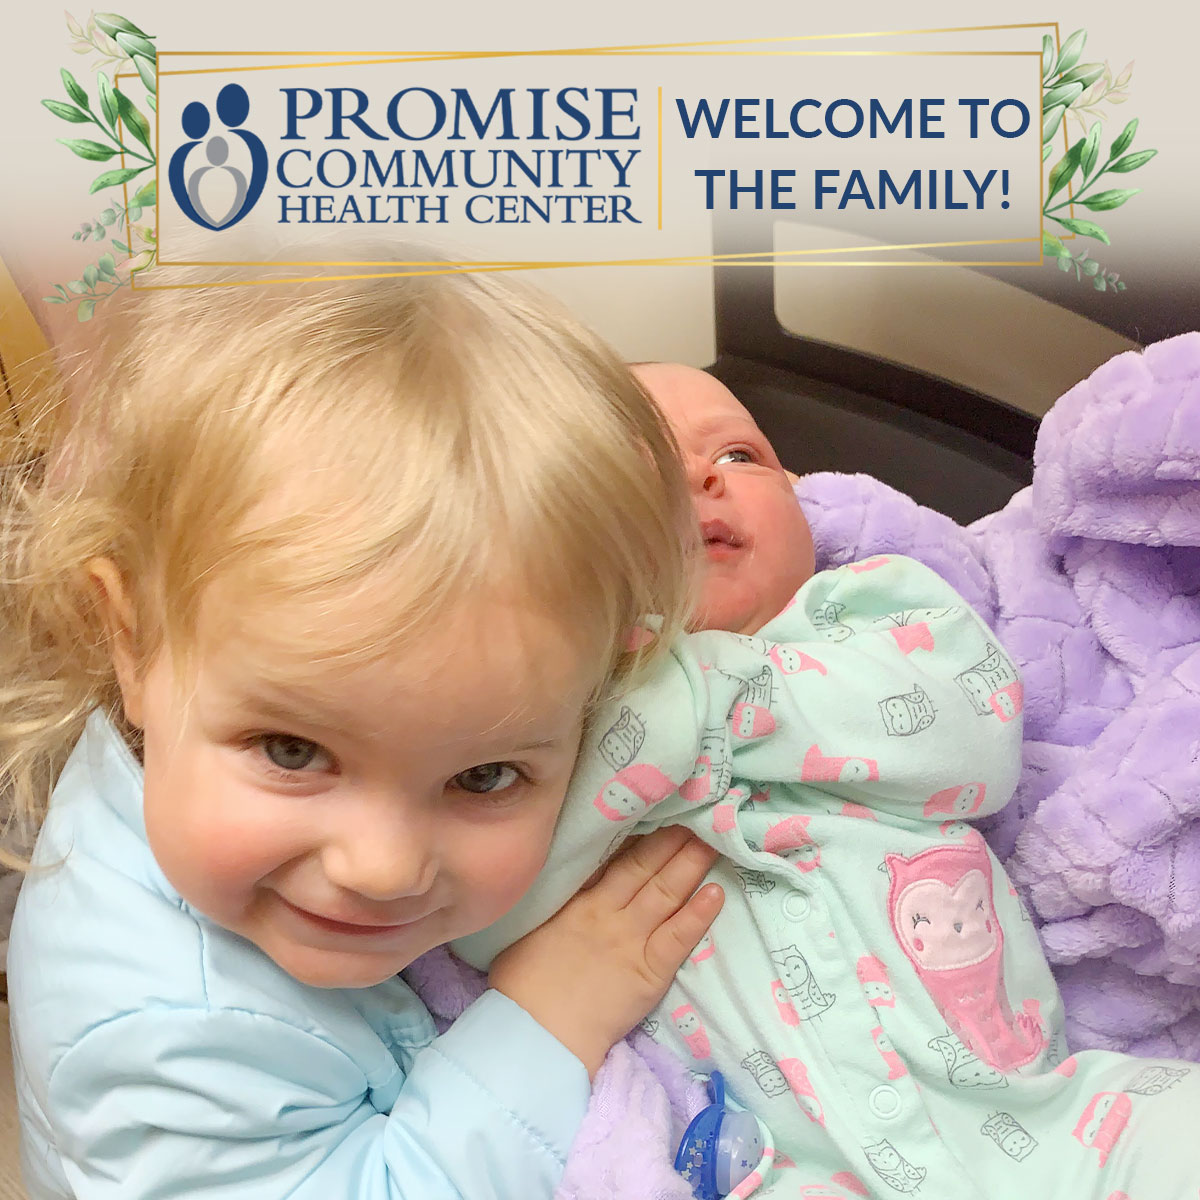 Hanson family from Sioux City Iowa, Home birth | Promise Community Health Center in Sioux Center, Iowa | Home births in northwest Iowa, Home births in southeast South Dakota, Home births in southwest Minnesota | Home births in Sioux Falls South Dakota, Home births in Beresford South Dakota, Home births in Sioux City IA, Home births in LeMars IA, Home births in Worthington MN, Home births in Iowa, Home births in South Dakota, Home births in Minnesota